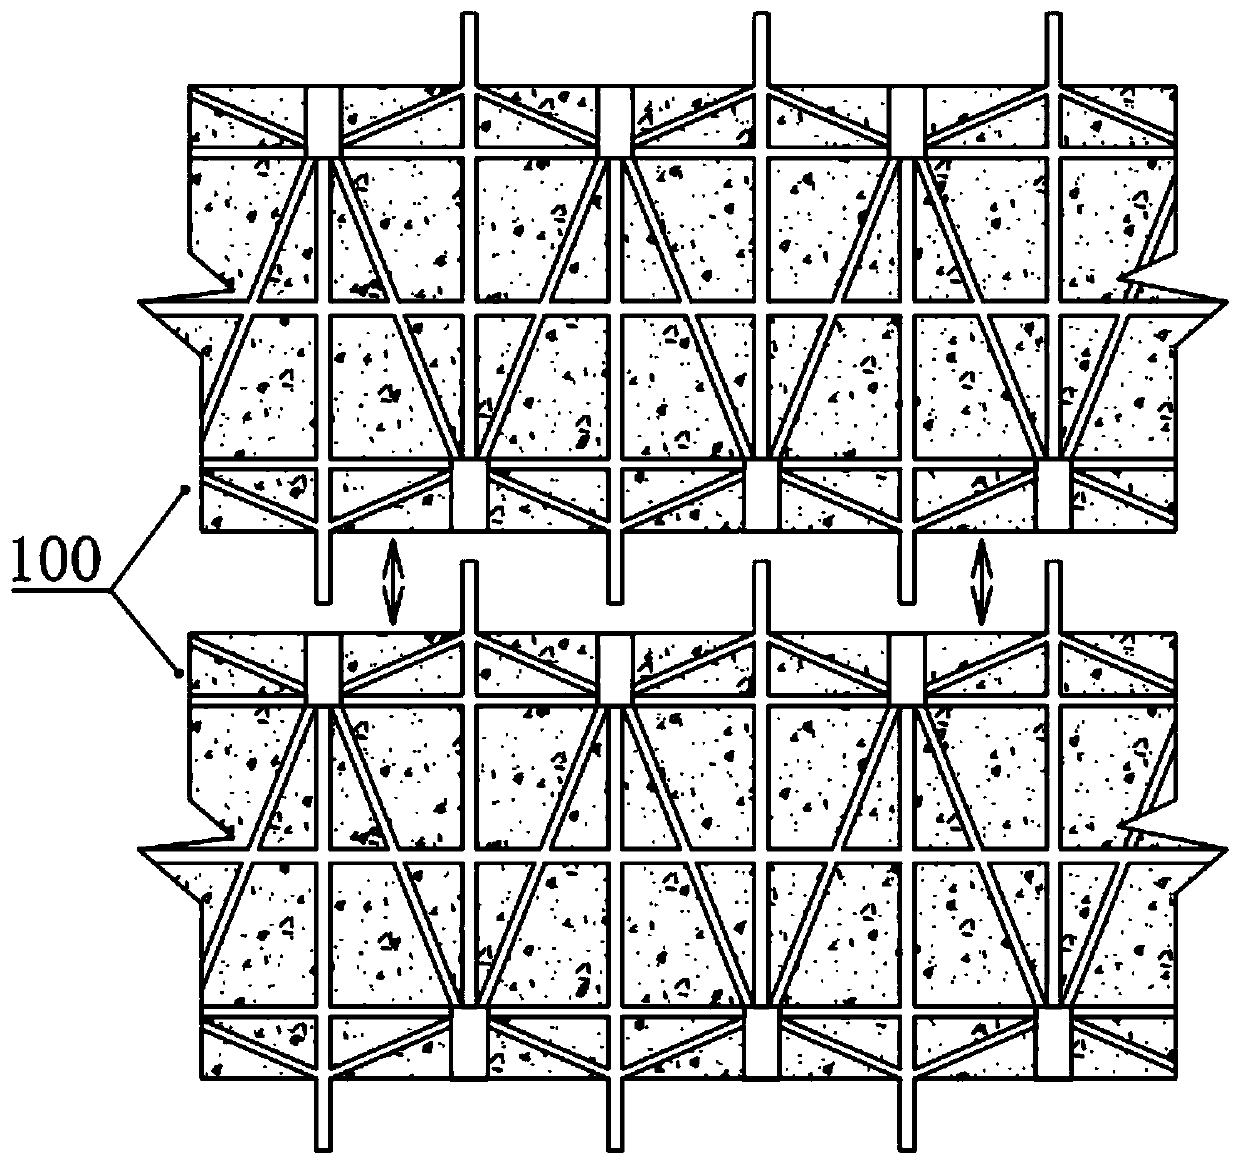 Fabricated shear wall structure vertical connecting structure